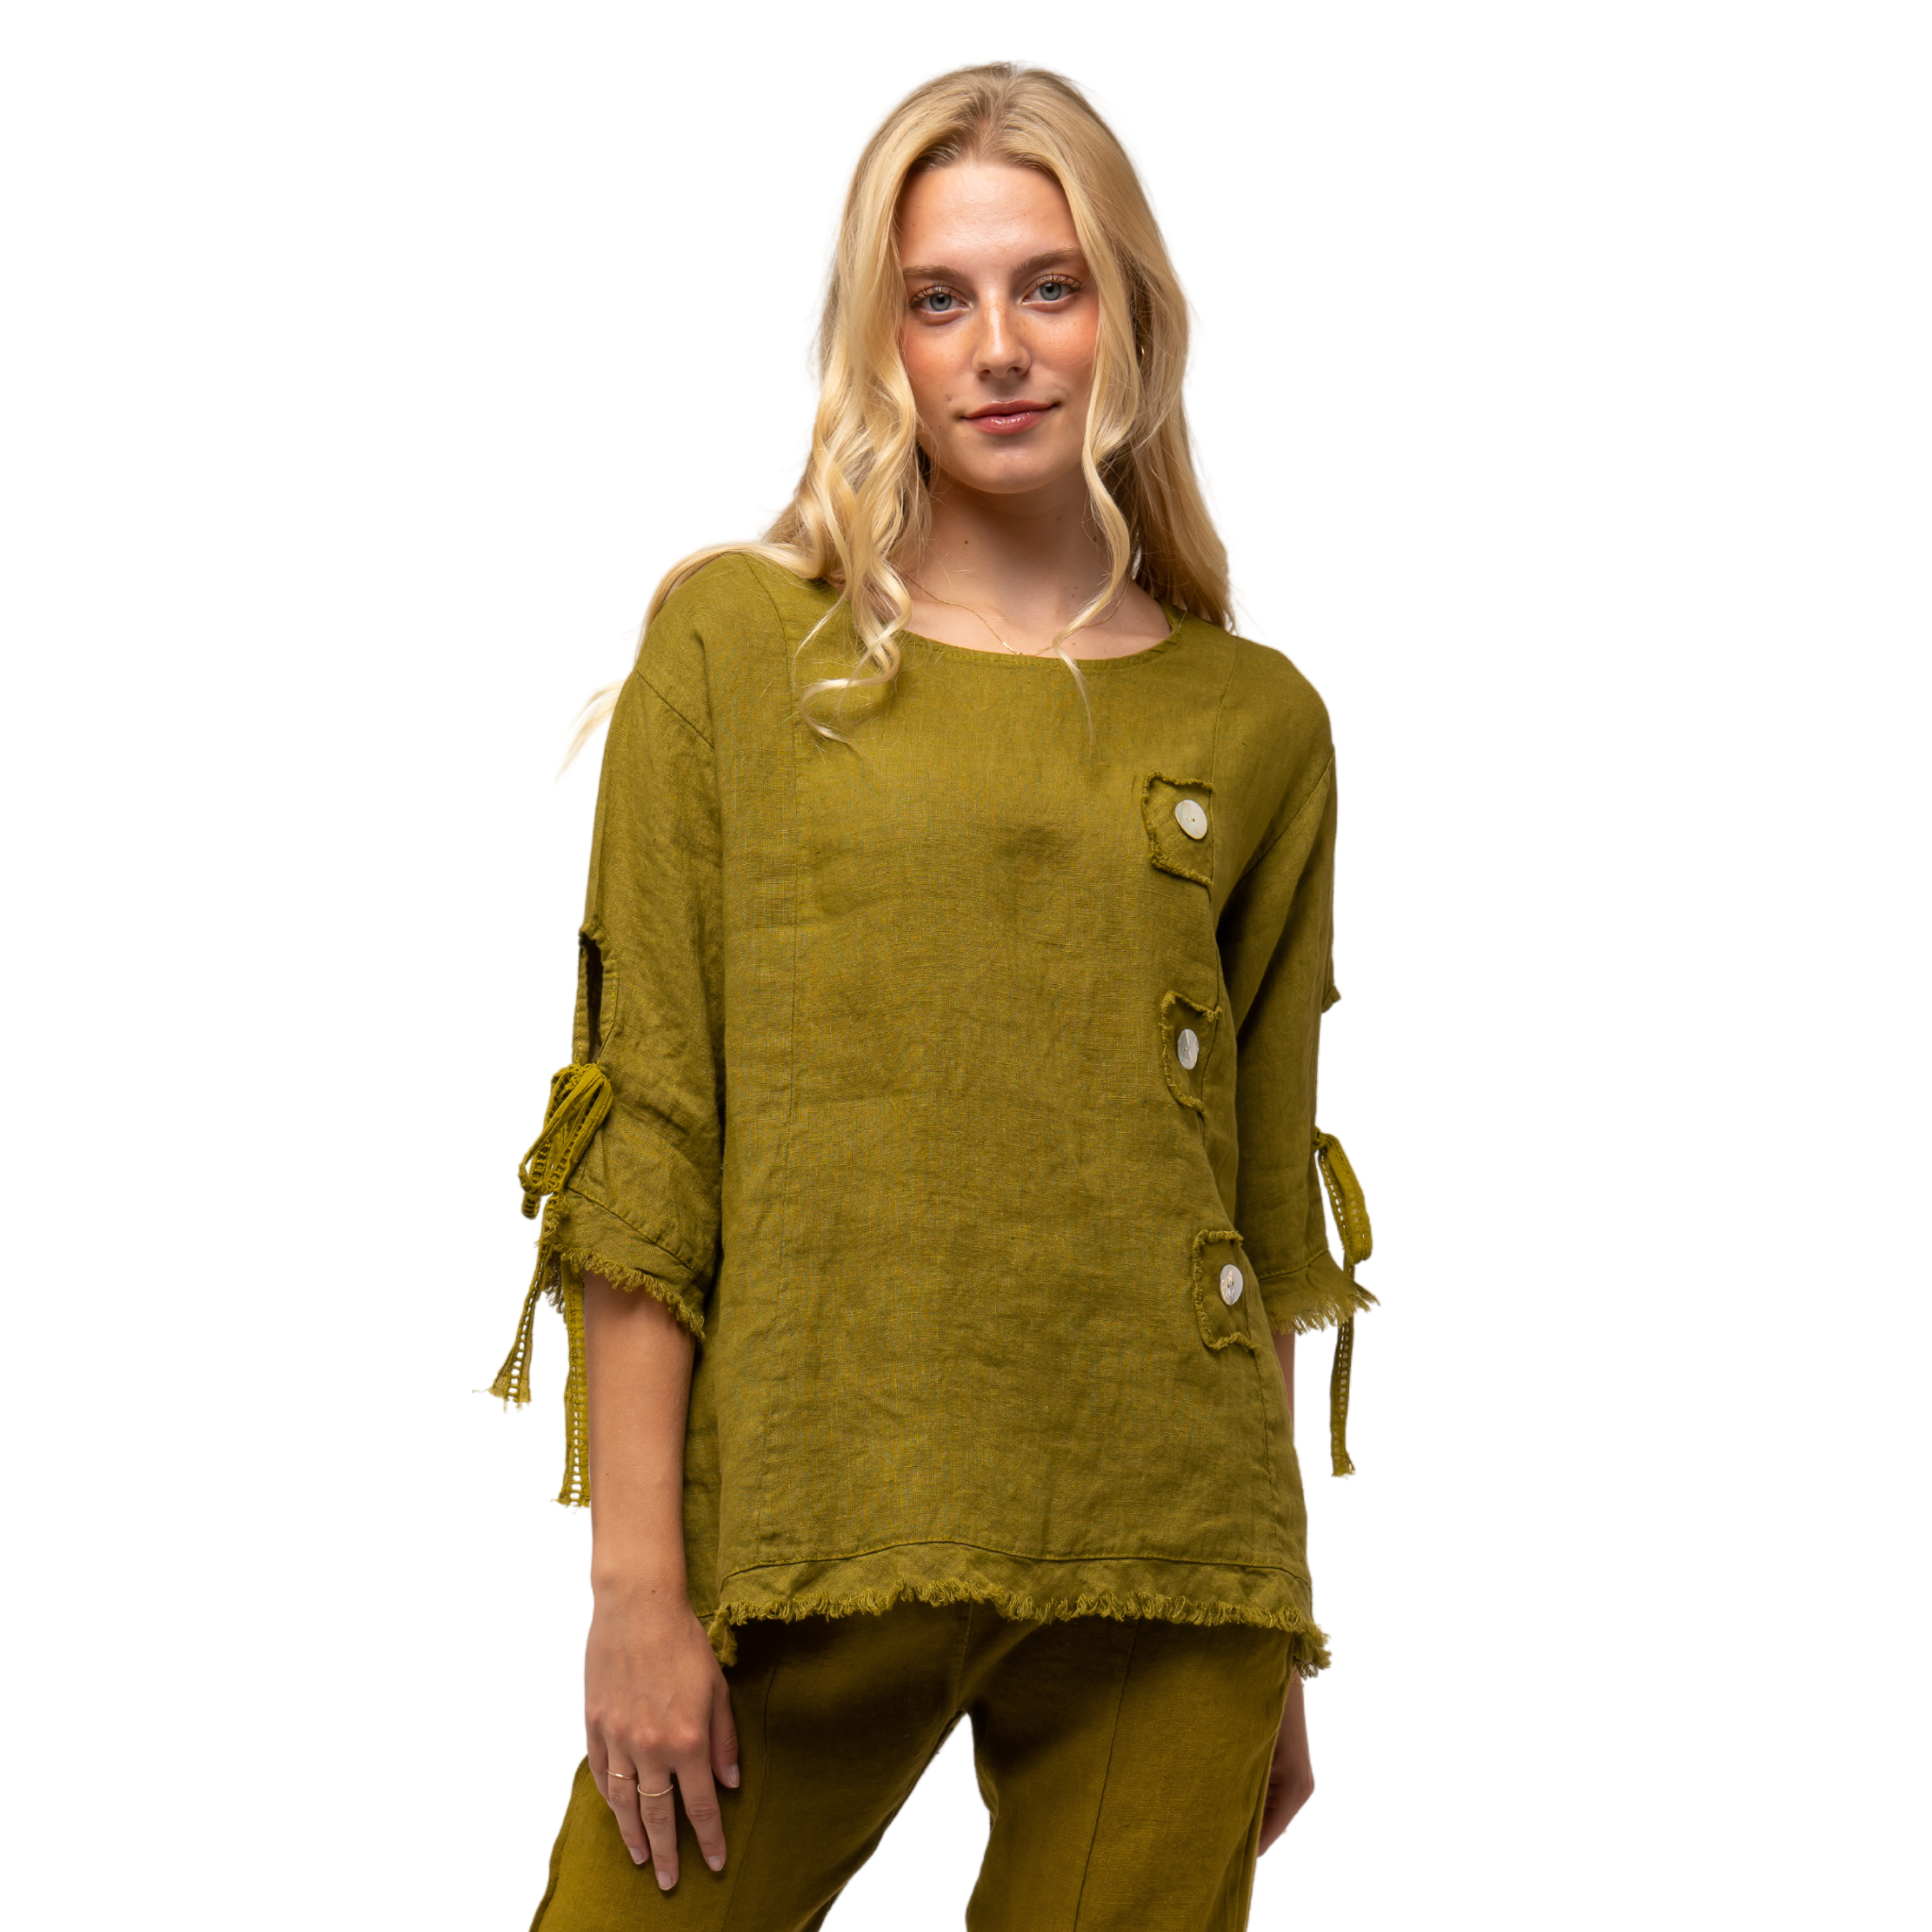 French Linen Ragged Top